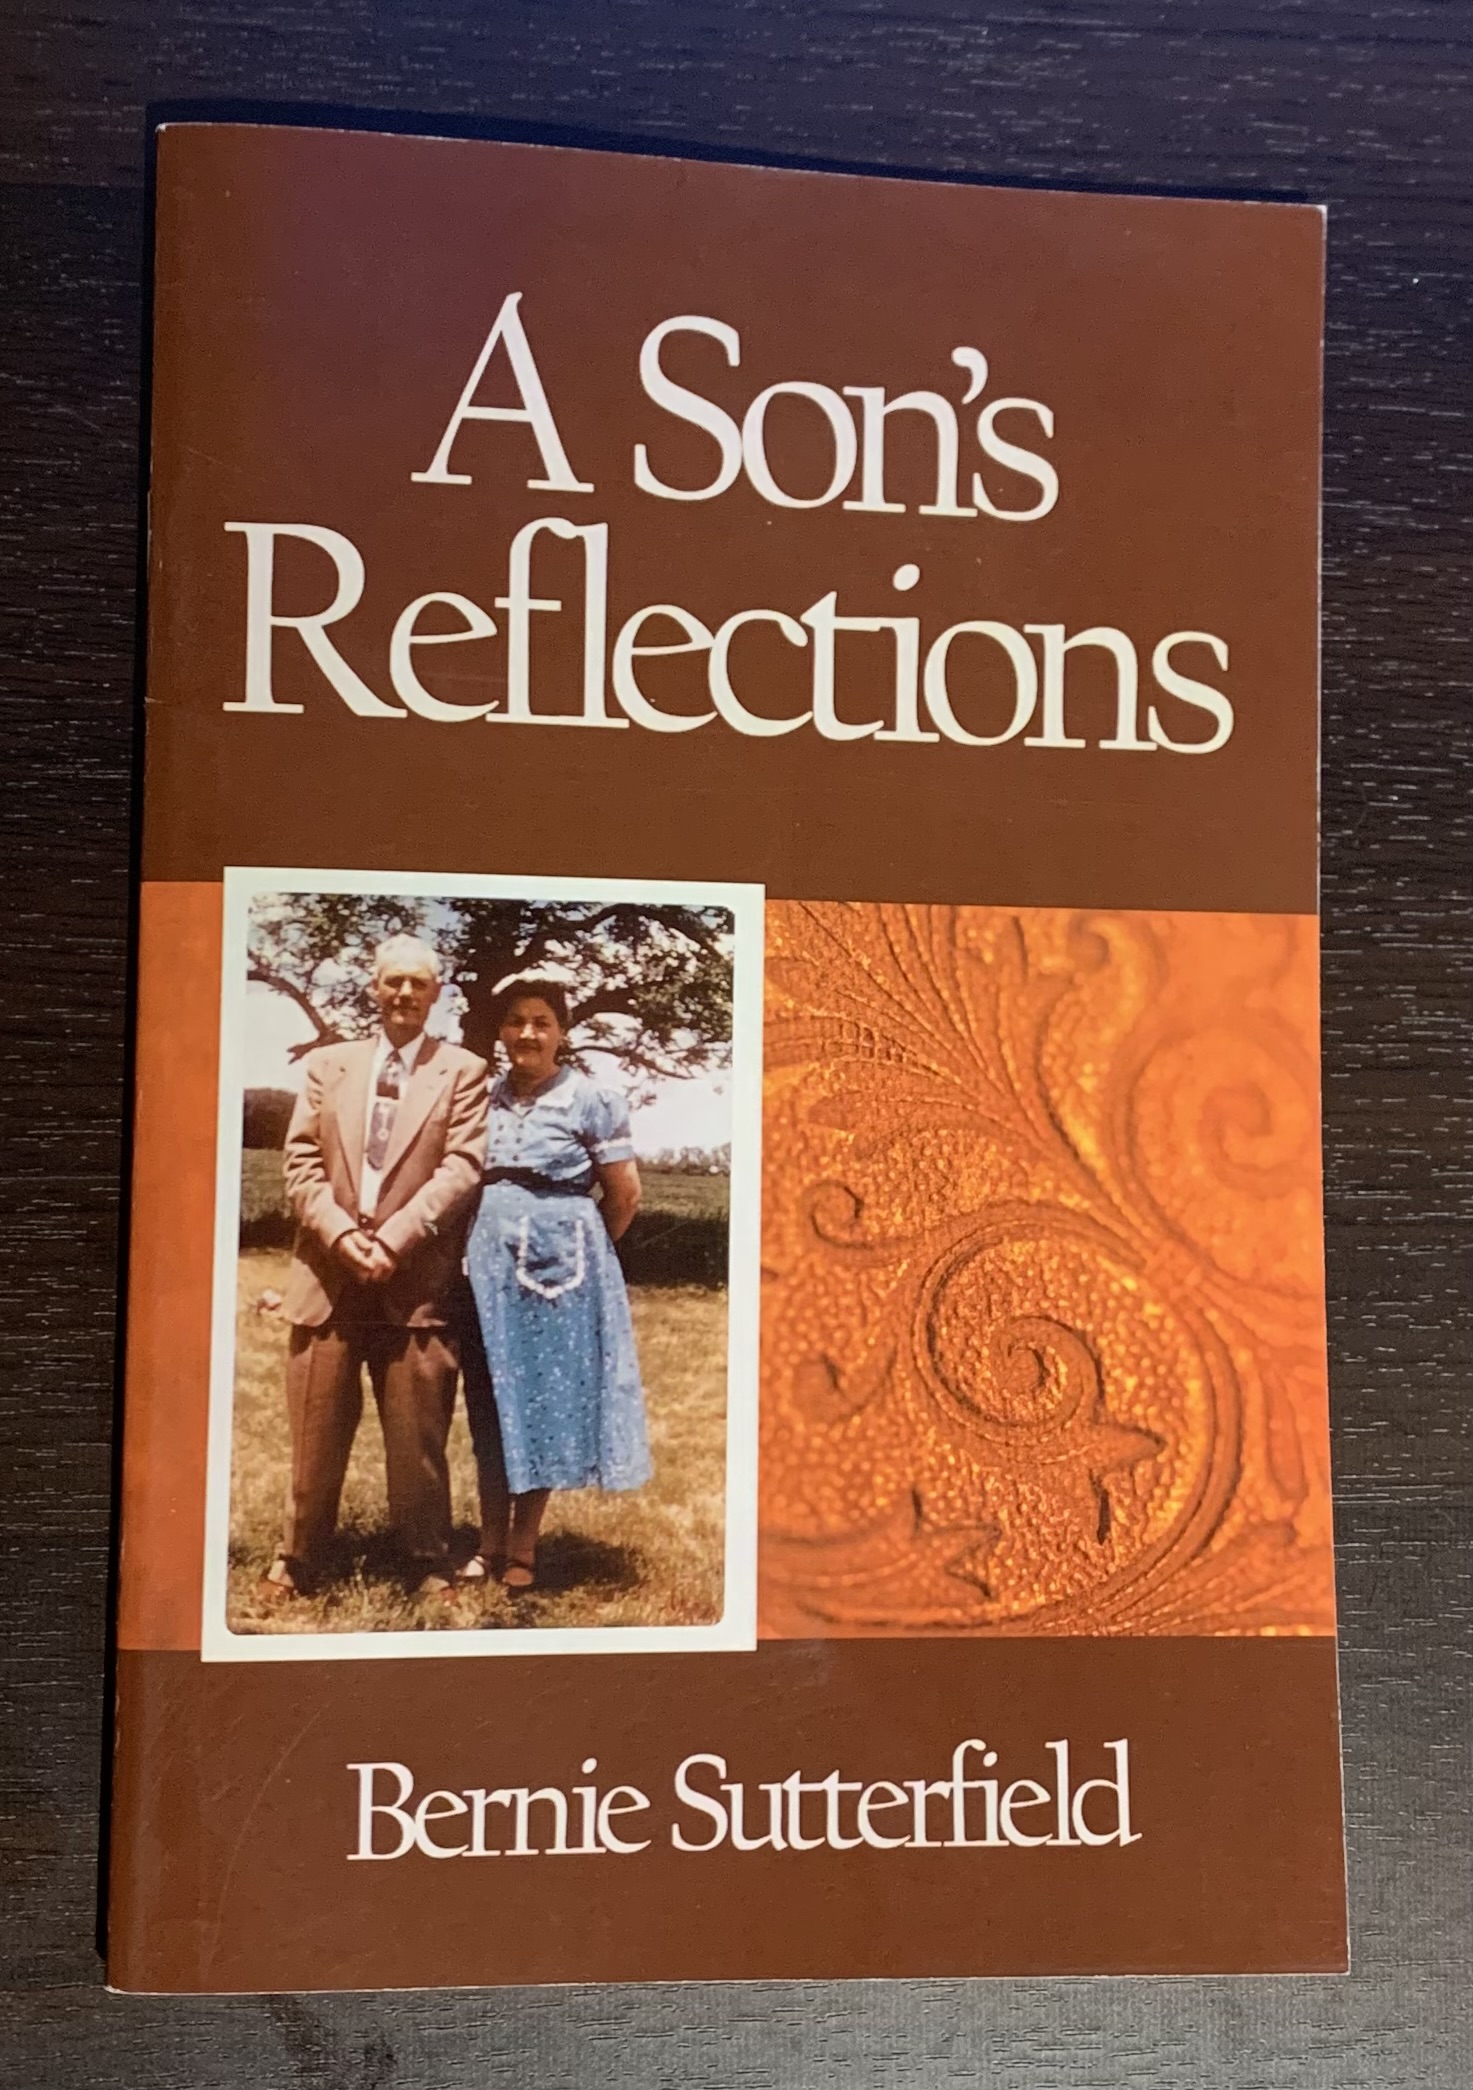 A Son's Reflections